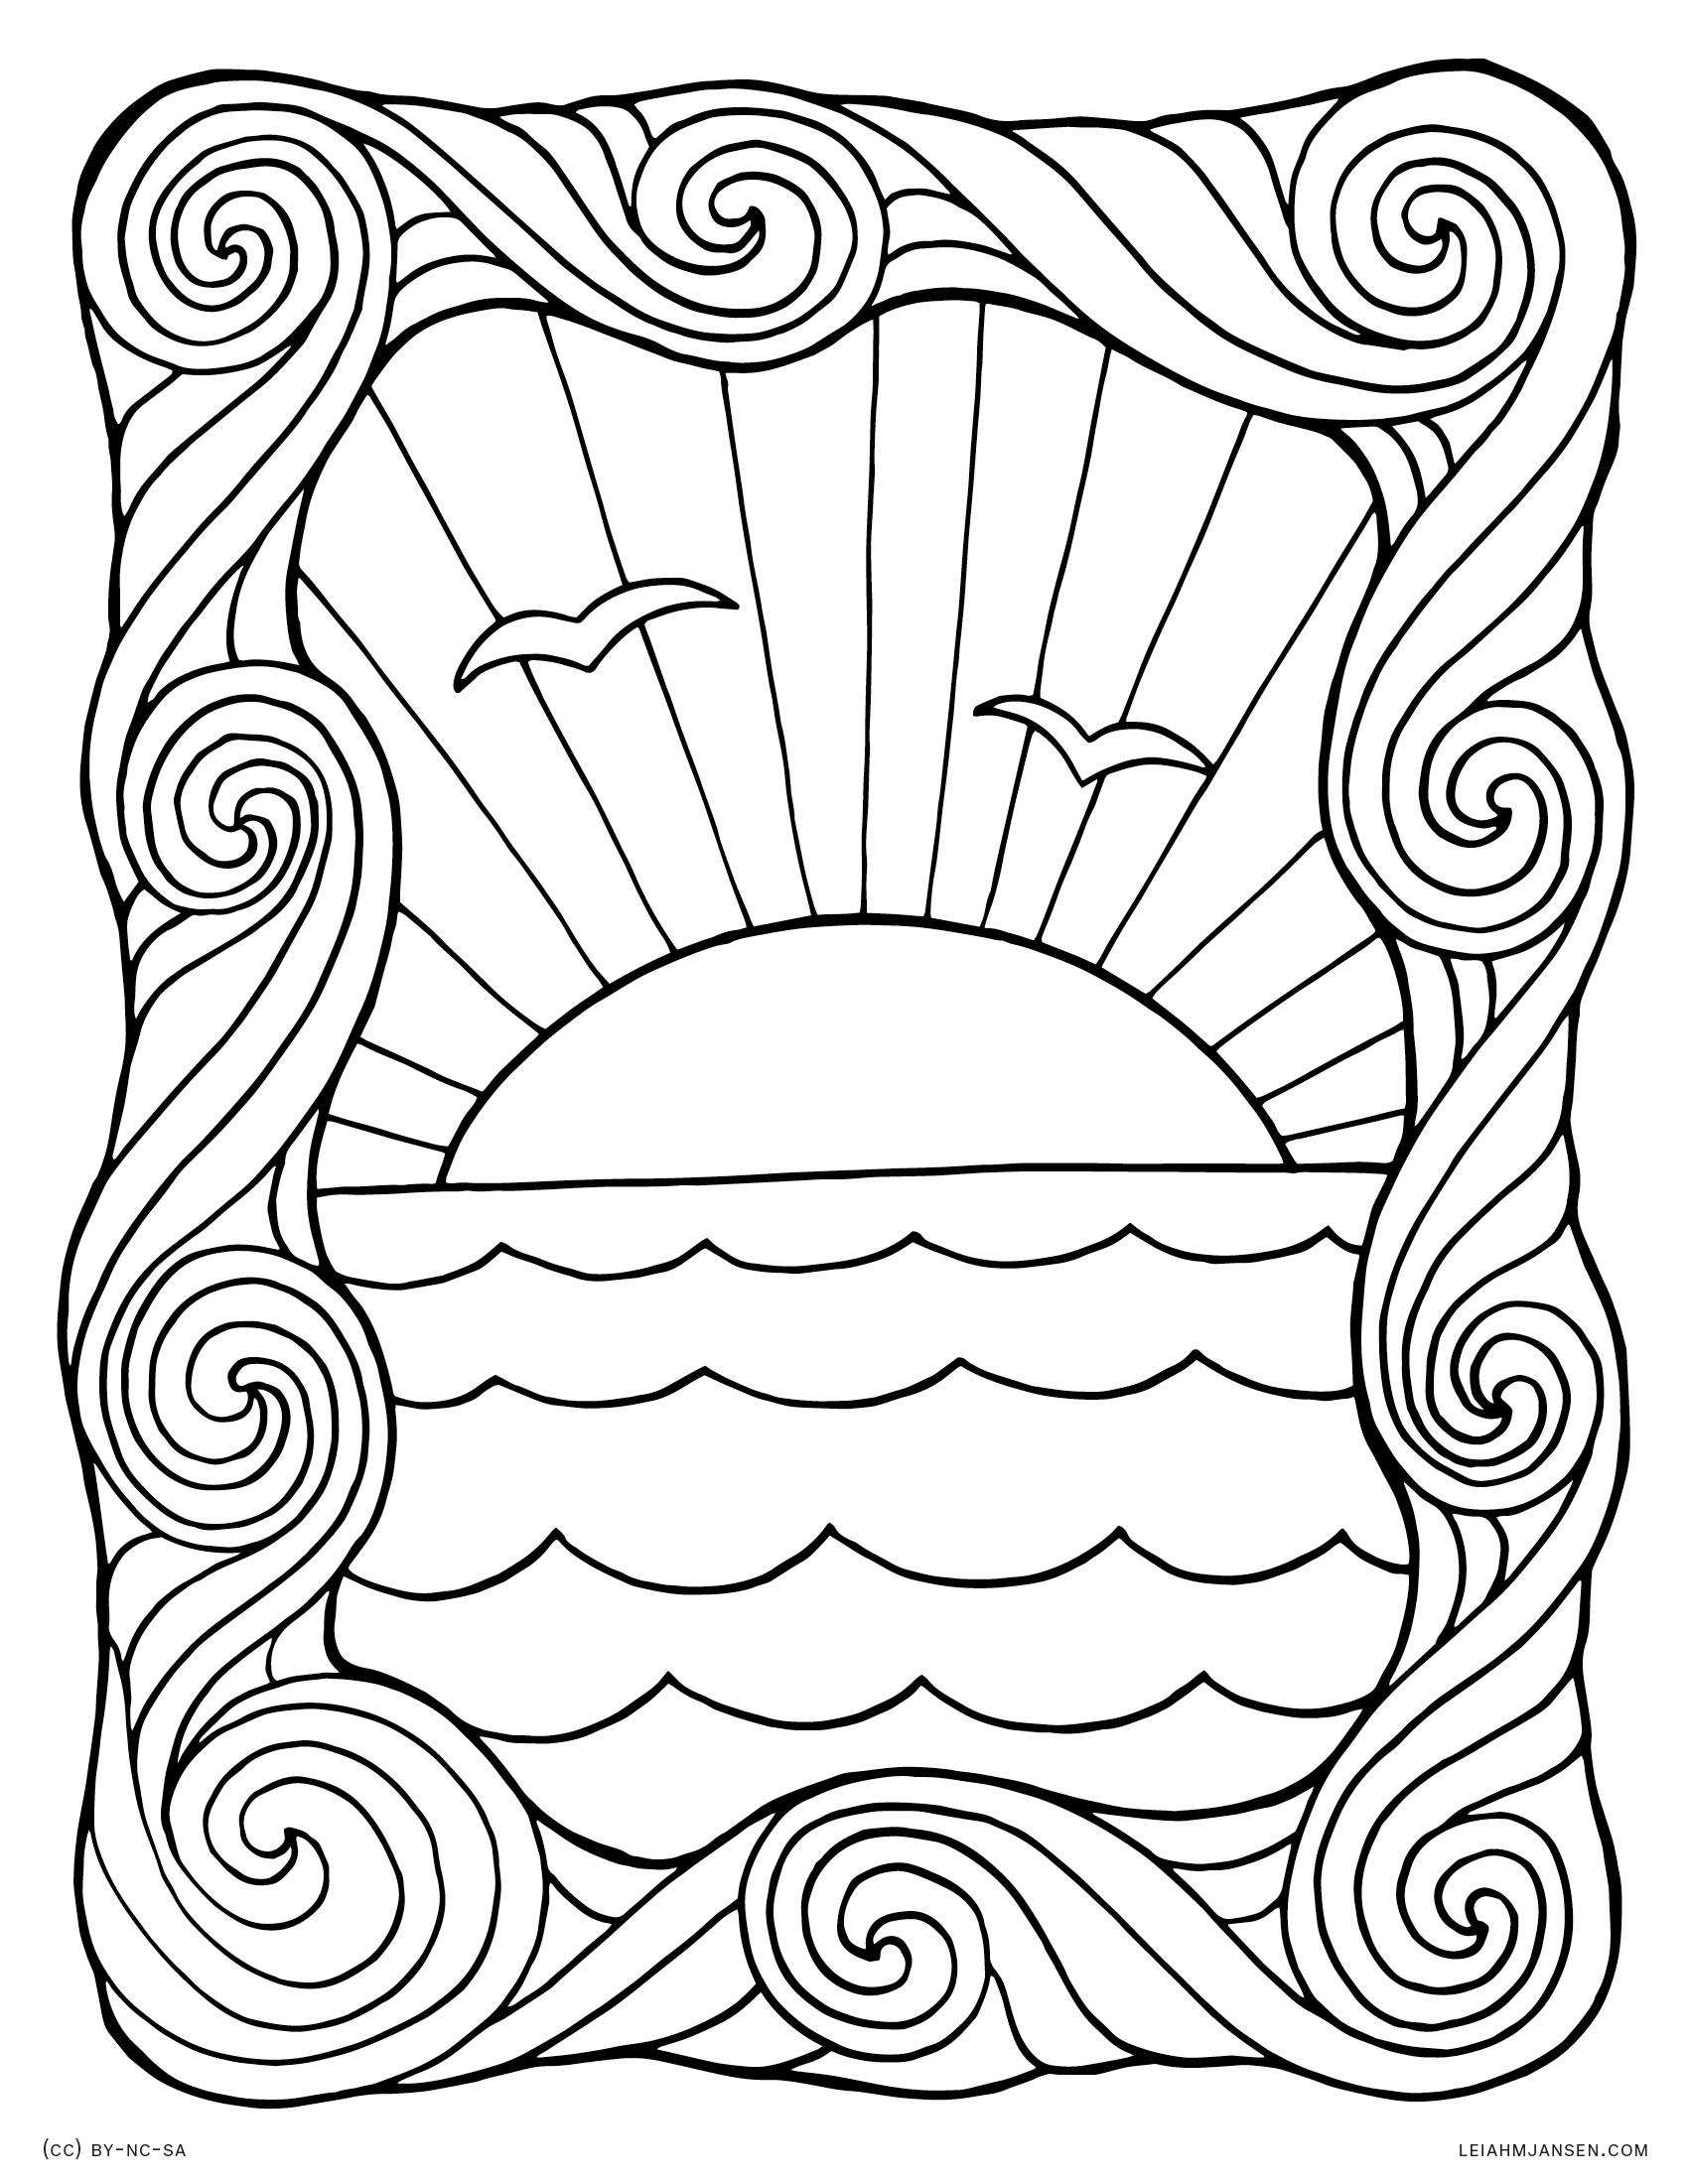 printable-coloring-pages-ocean